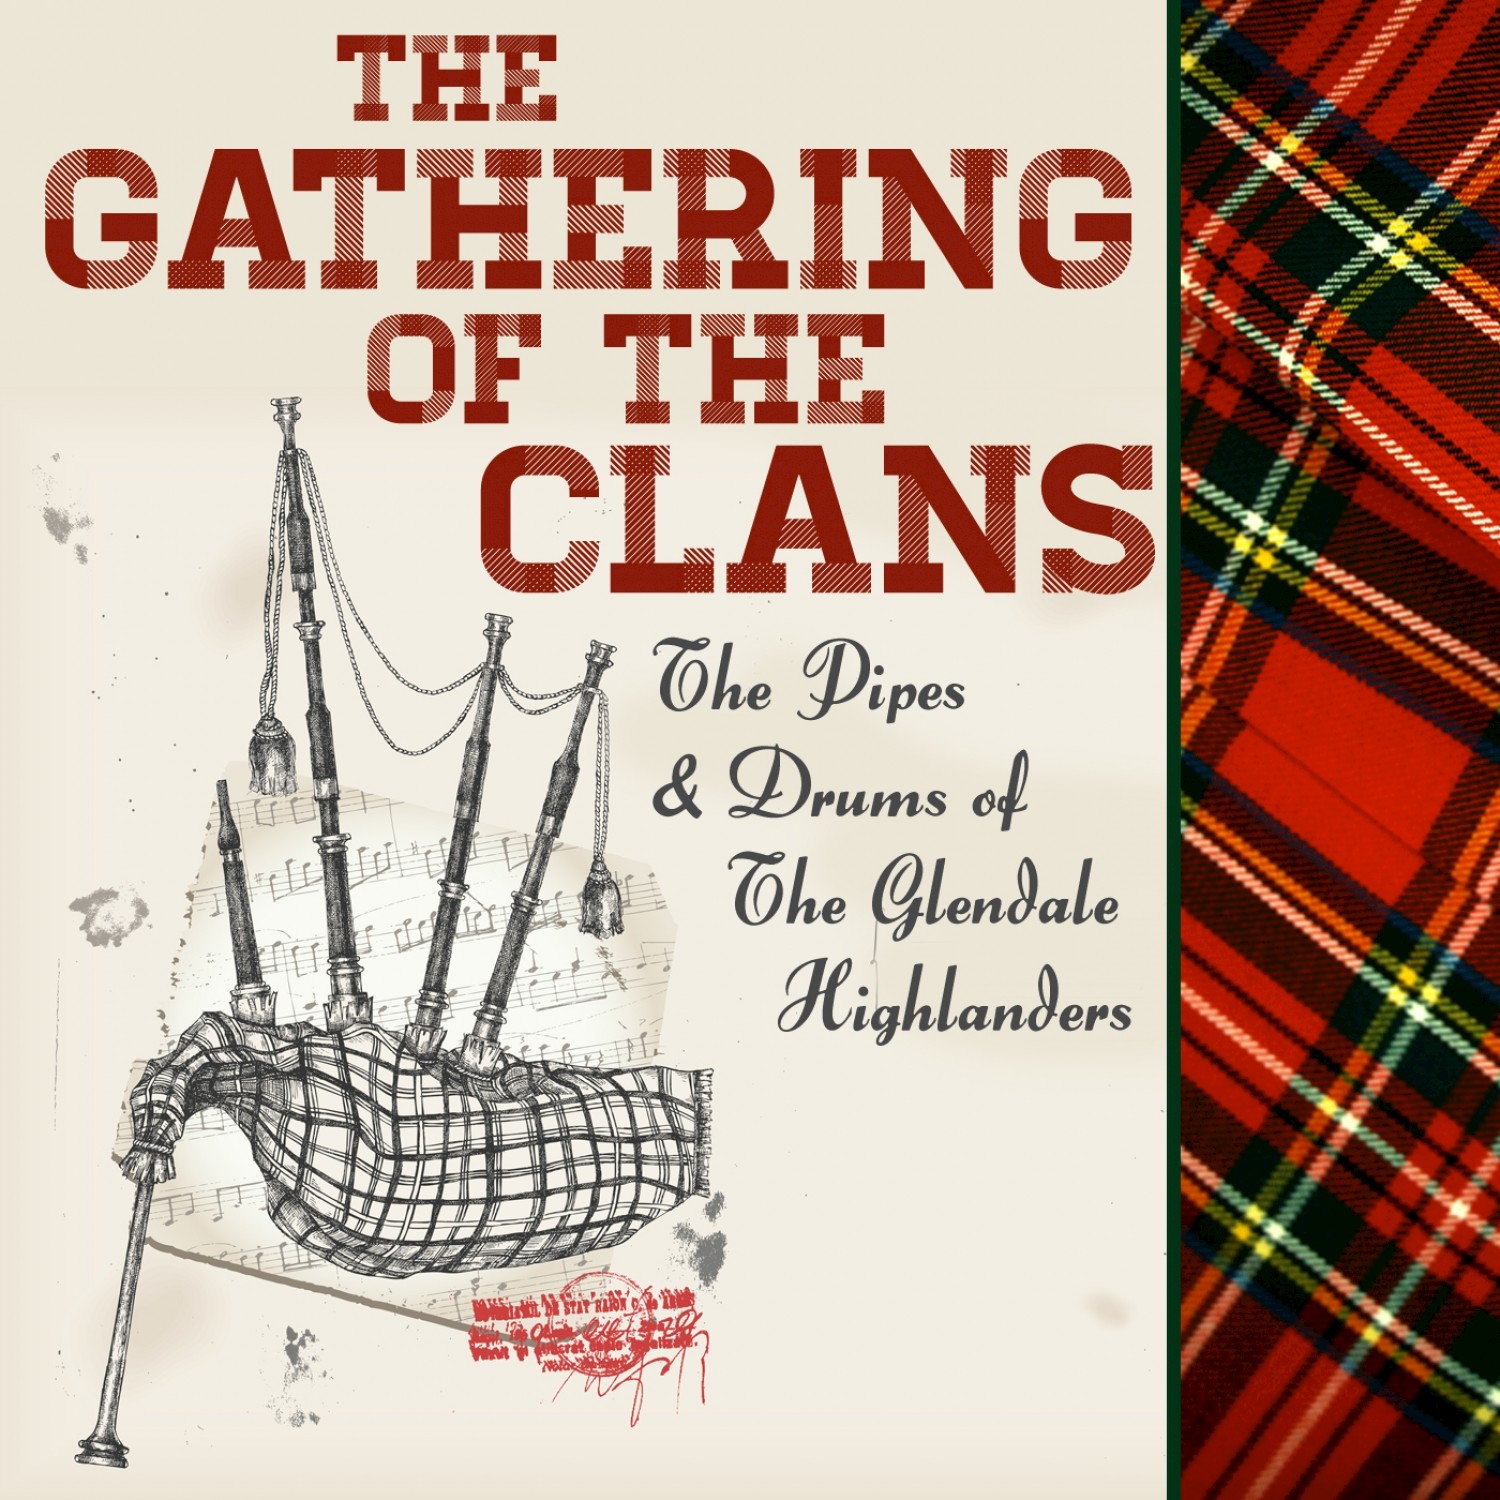 Gathering of the Clans